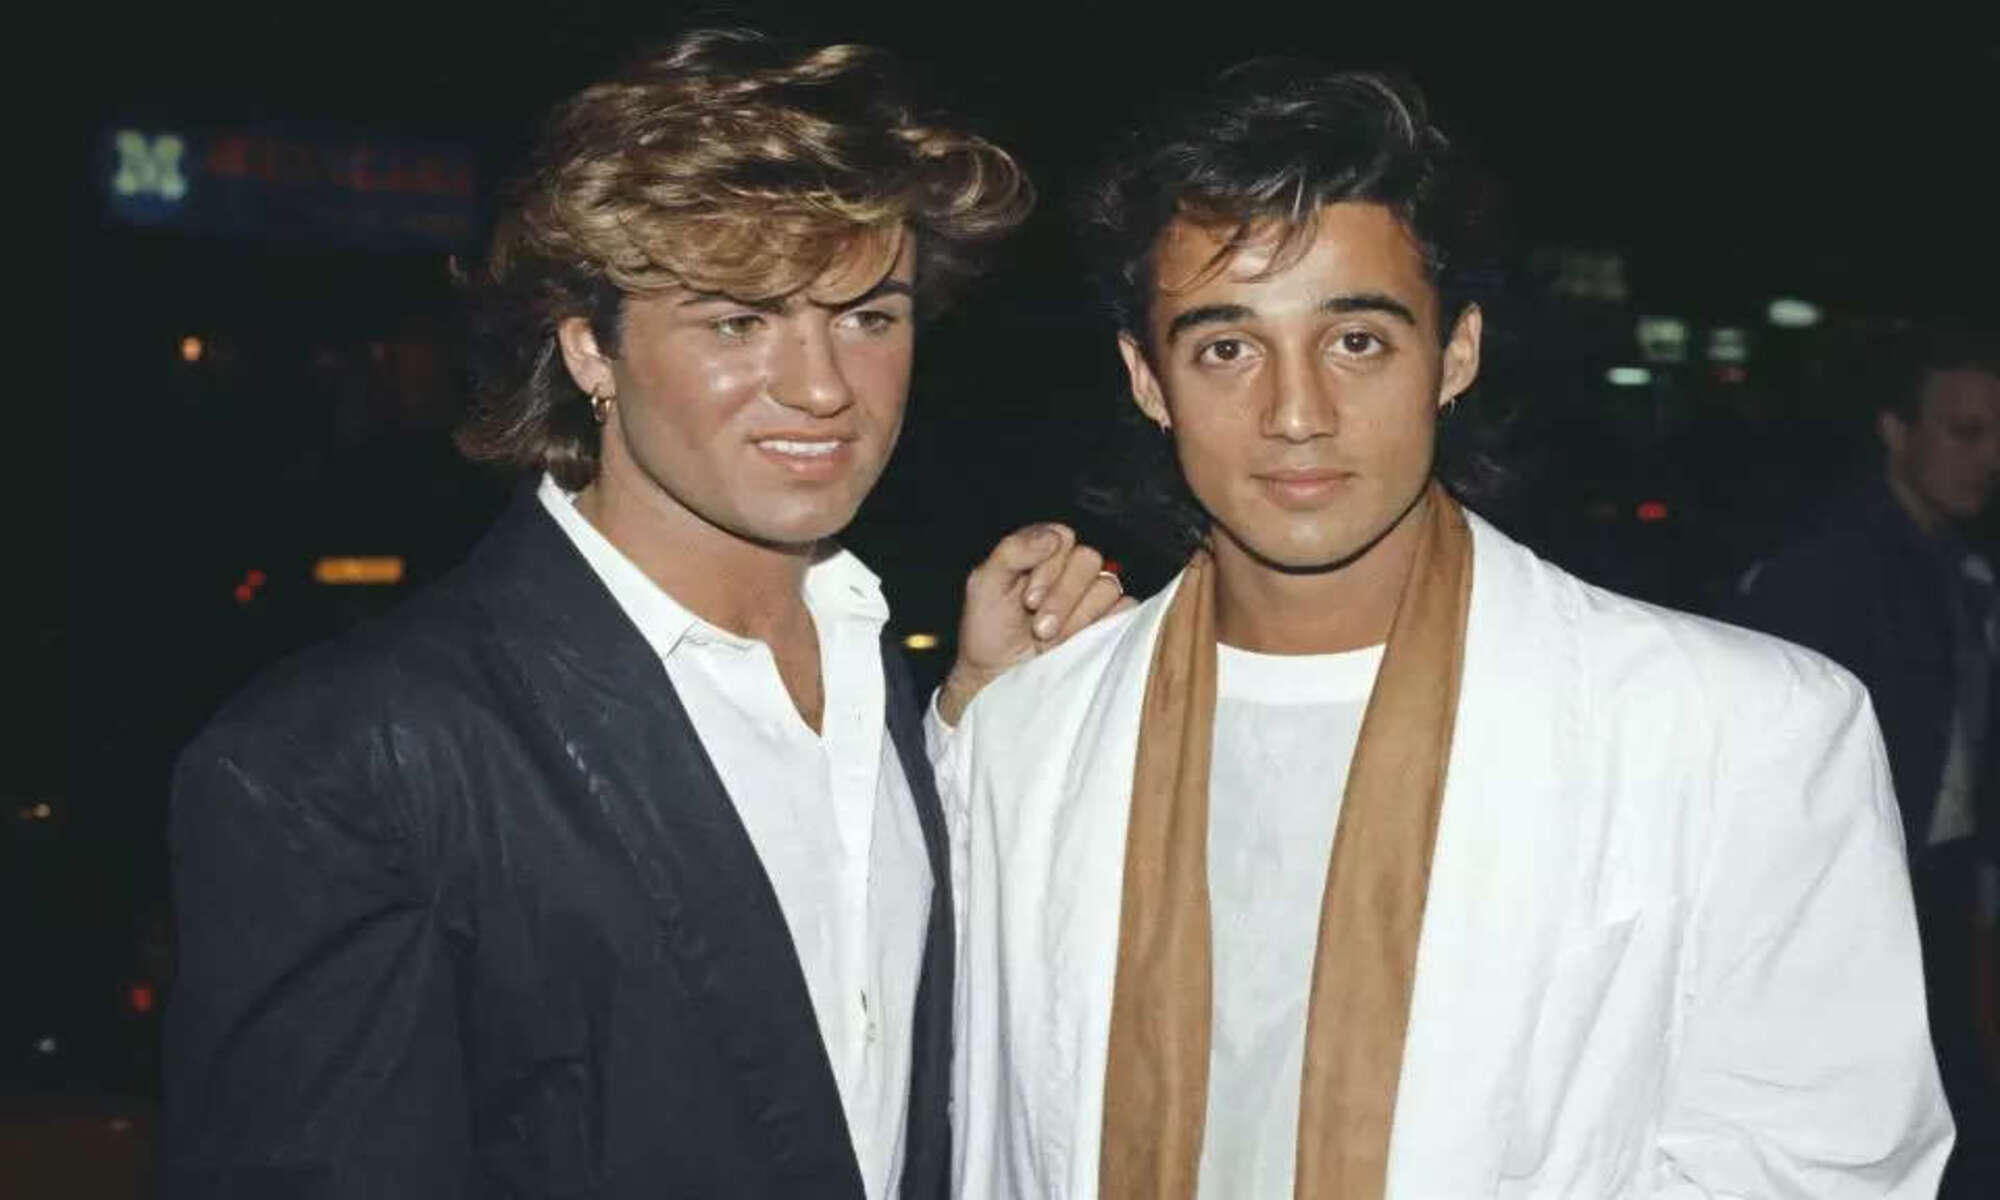 Michael and Andrew part ways as 'Wham!' breaks apart.